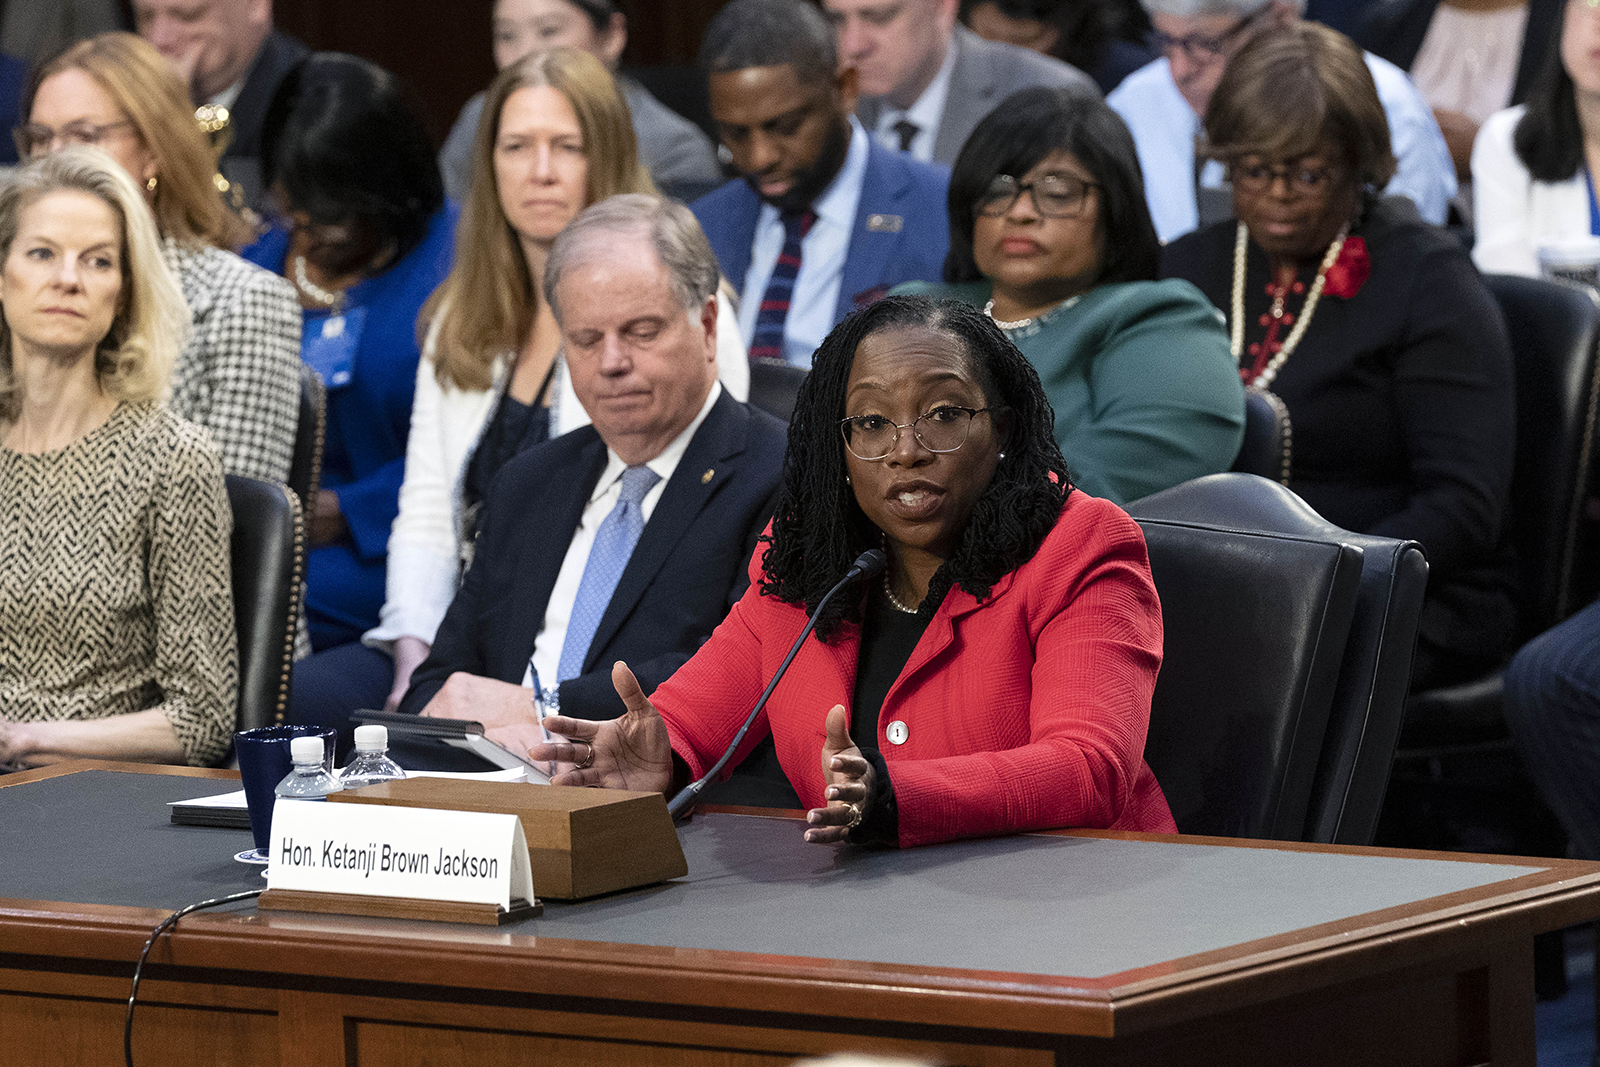 Supreme Court nominee Ketanji Brown Jackson speaks before the Senate Judiciary Committee as she attends the second day of her confirmation hearing, on Capitol Hill, Tuesday, March 22, 2022, in Washington. ( AP Photo/Jose Luis Magana)